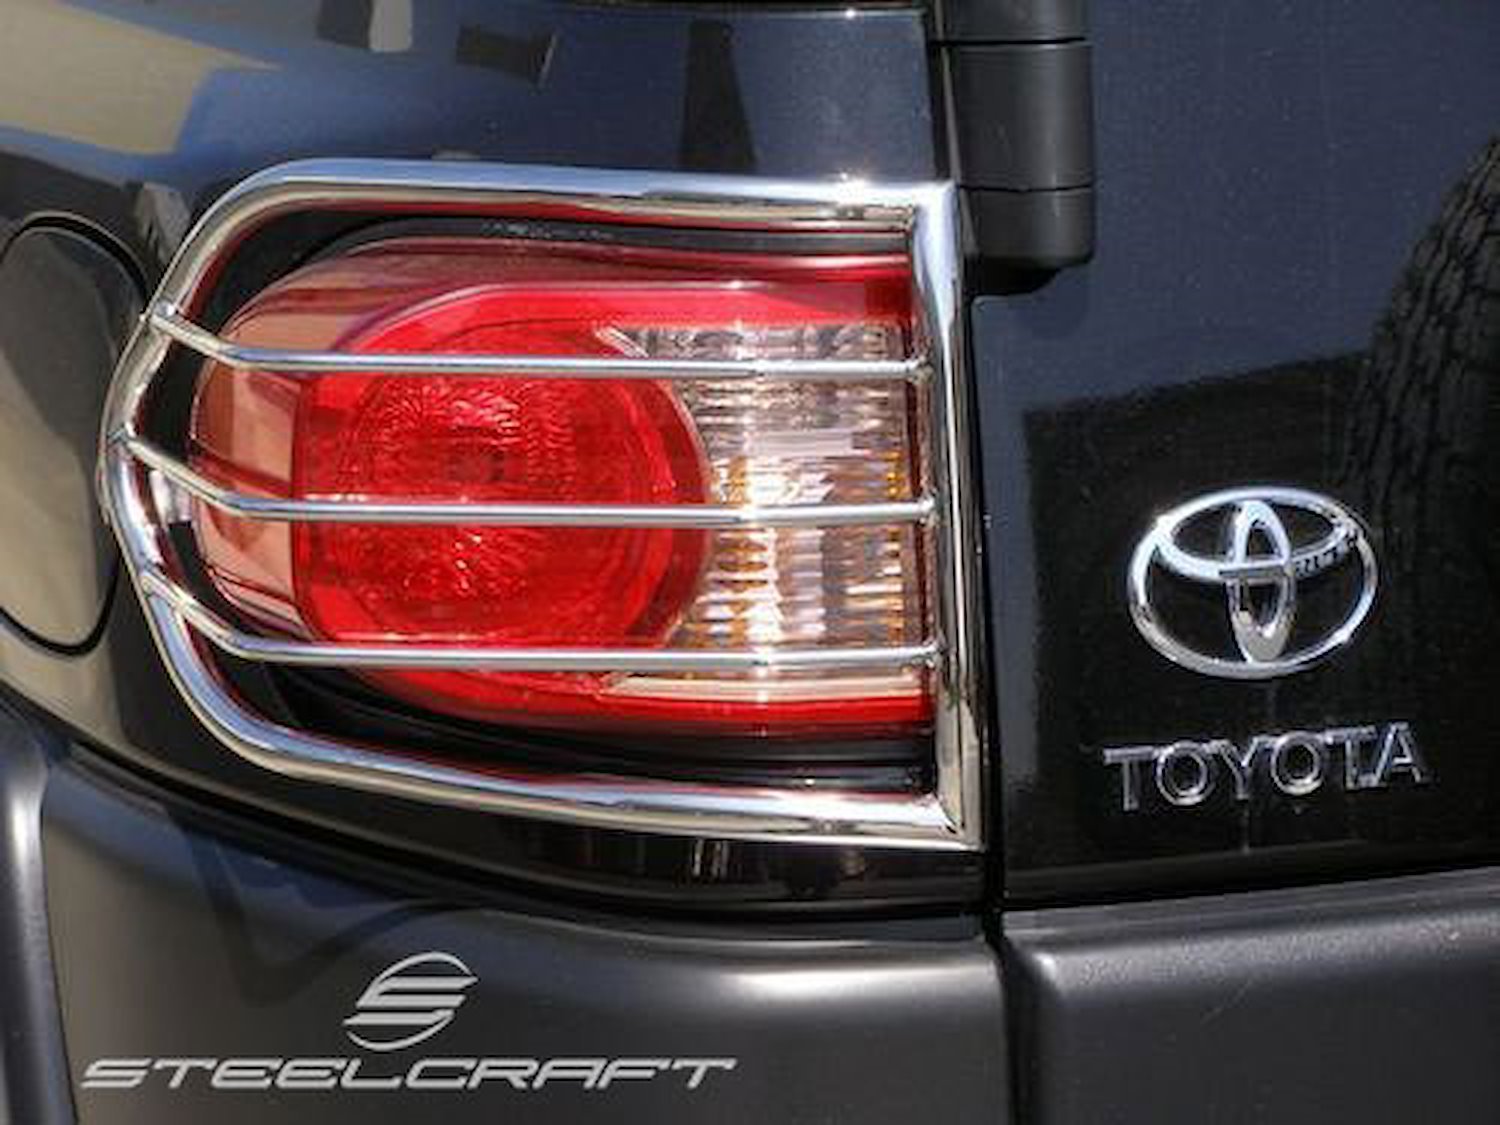 Taillight Guards are designed to contour your SUV